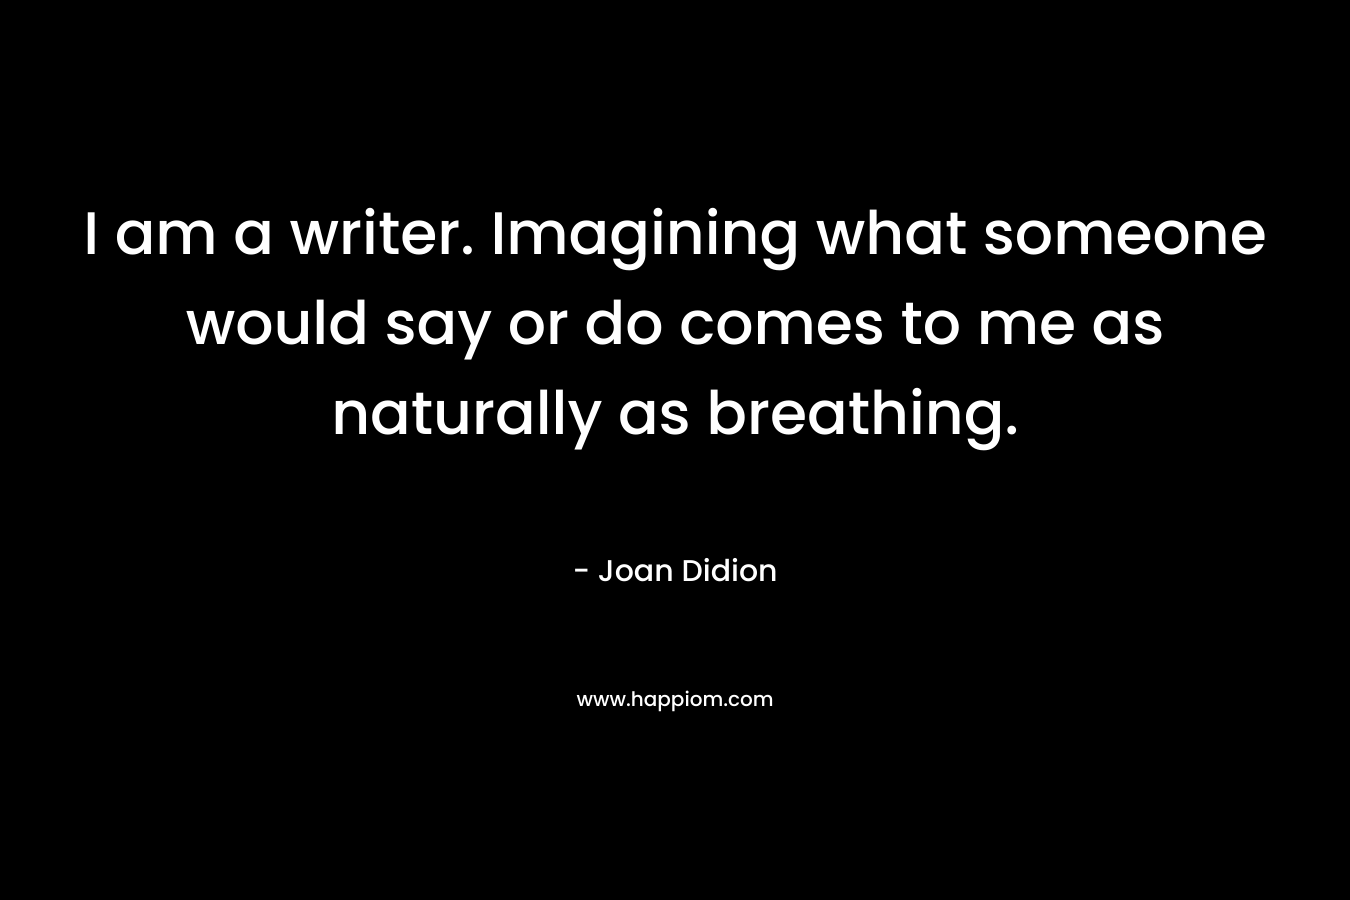 I am a writer. Imagining what someone would say or do comes to me as naturally as breathing. – Joan Didion